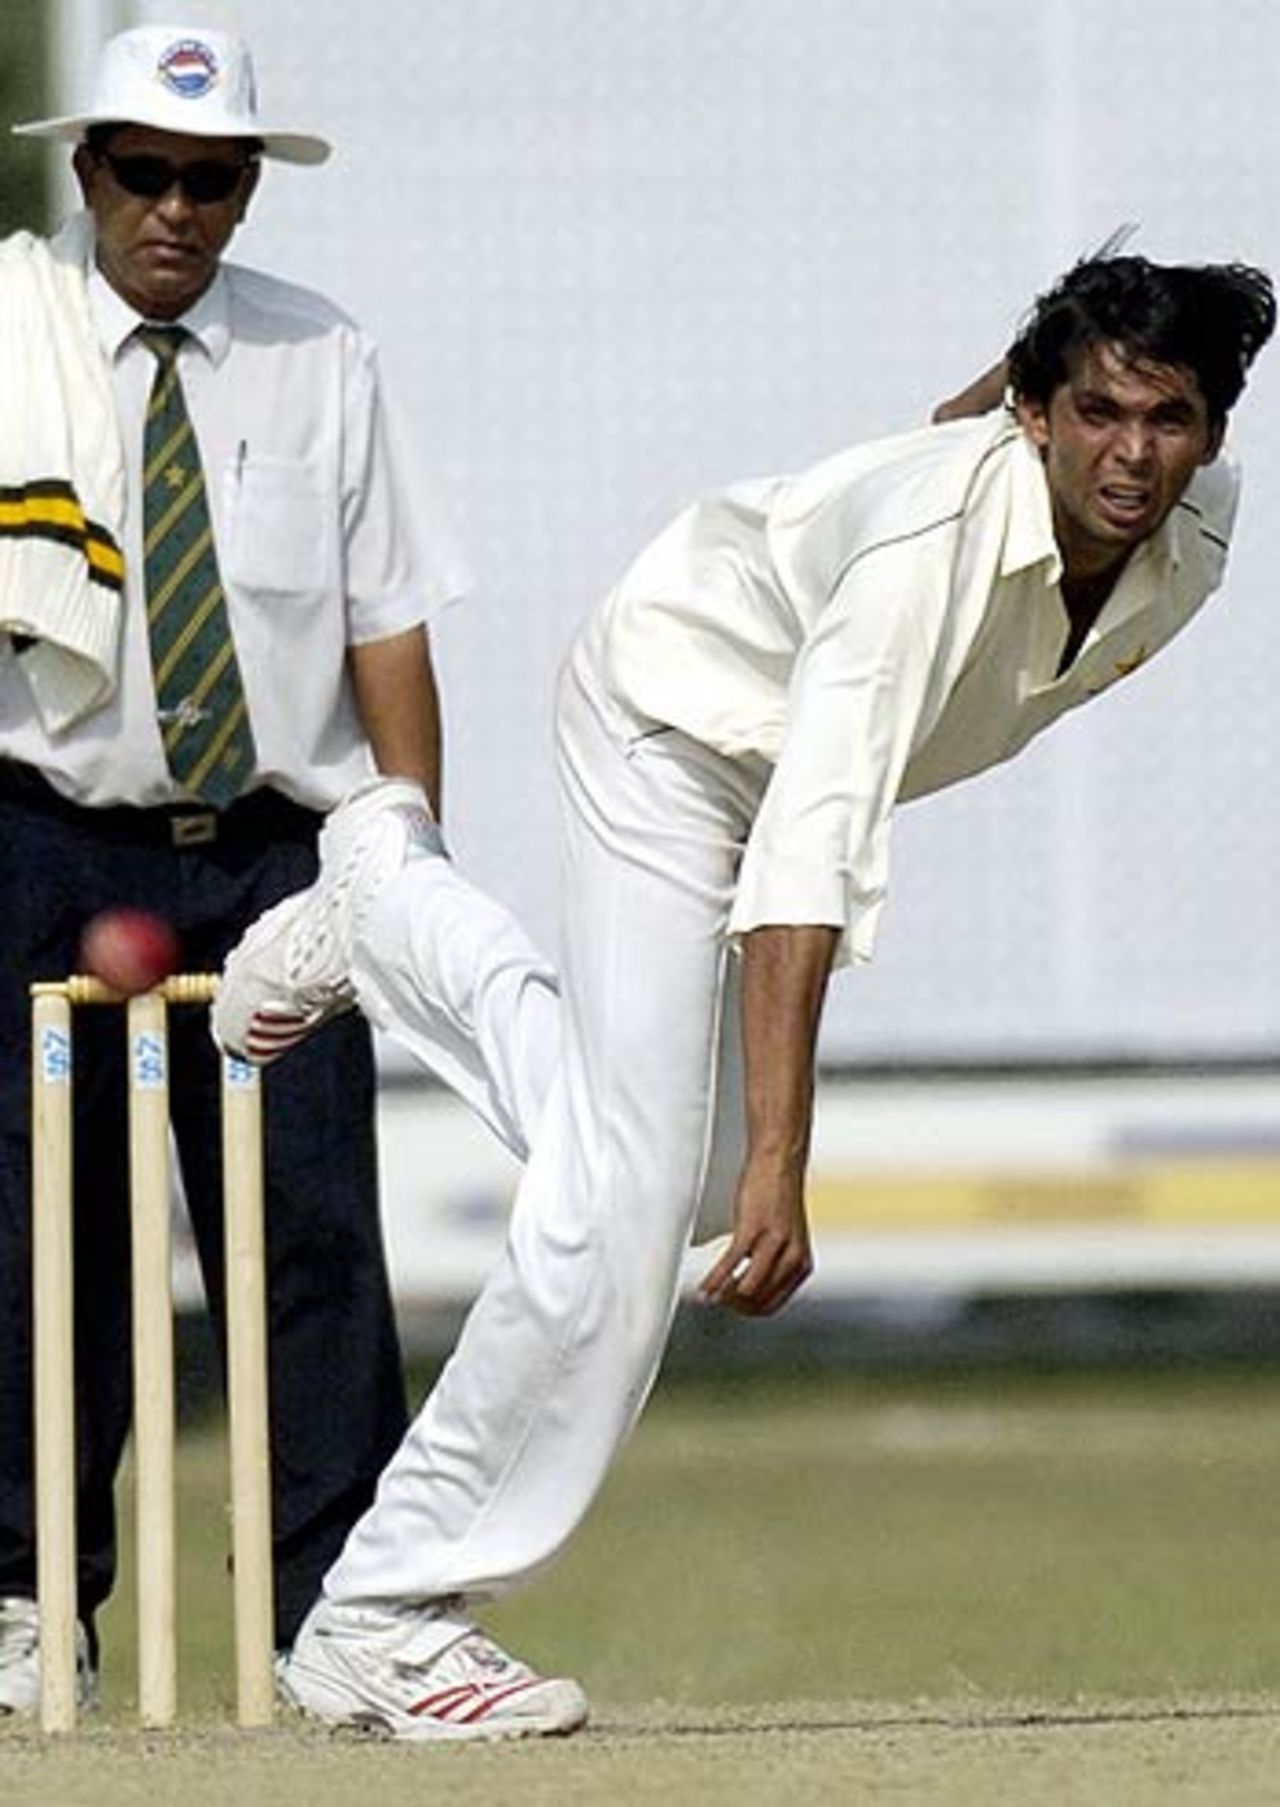 Mohammad Asif's nine wickets in the match kept England's batsmen on their toes, Pakistan A v England XI, Tour Match, Lahore, November 7, 2005